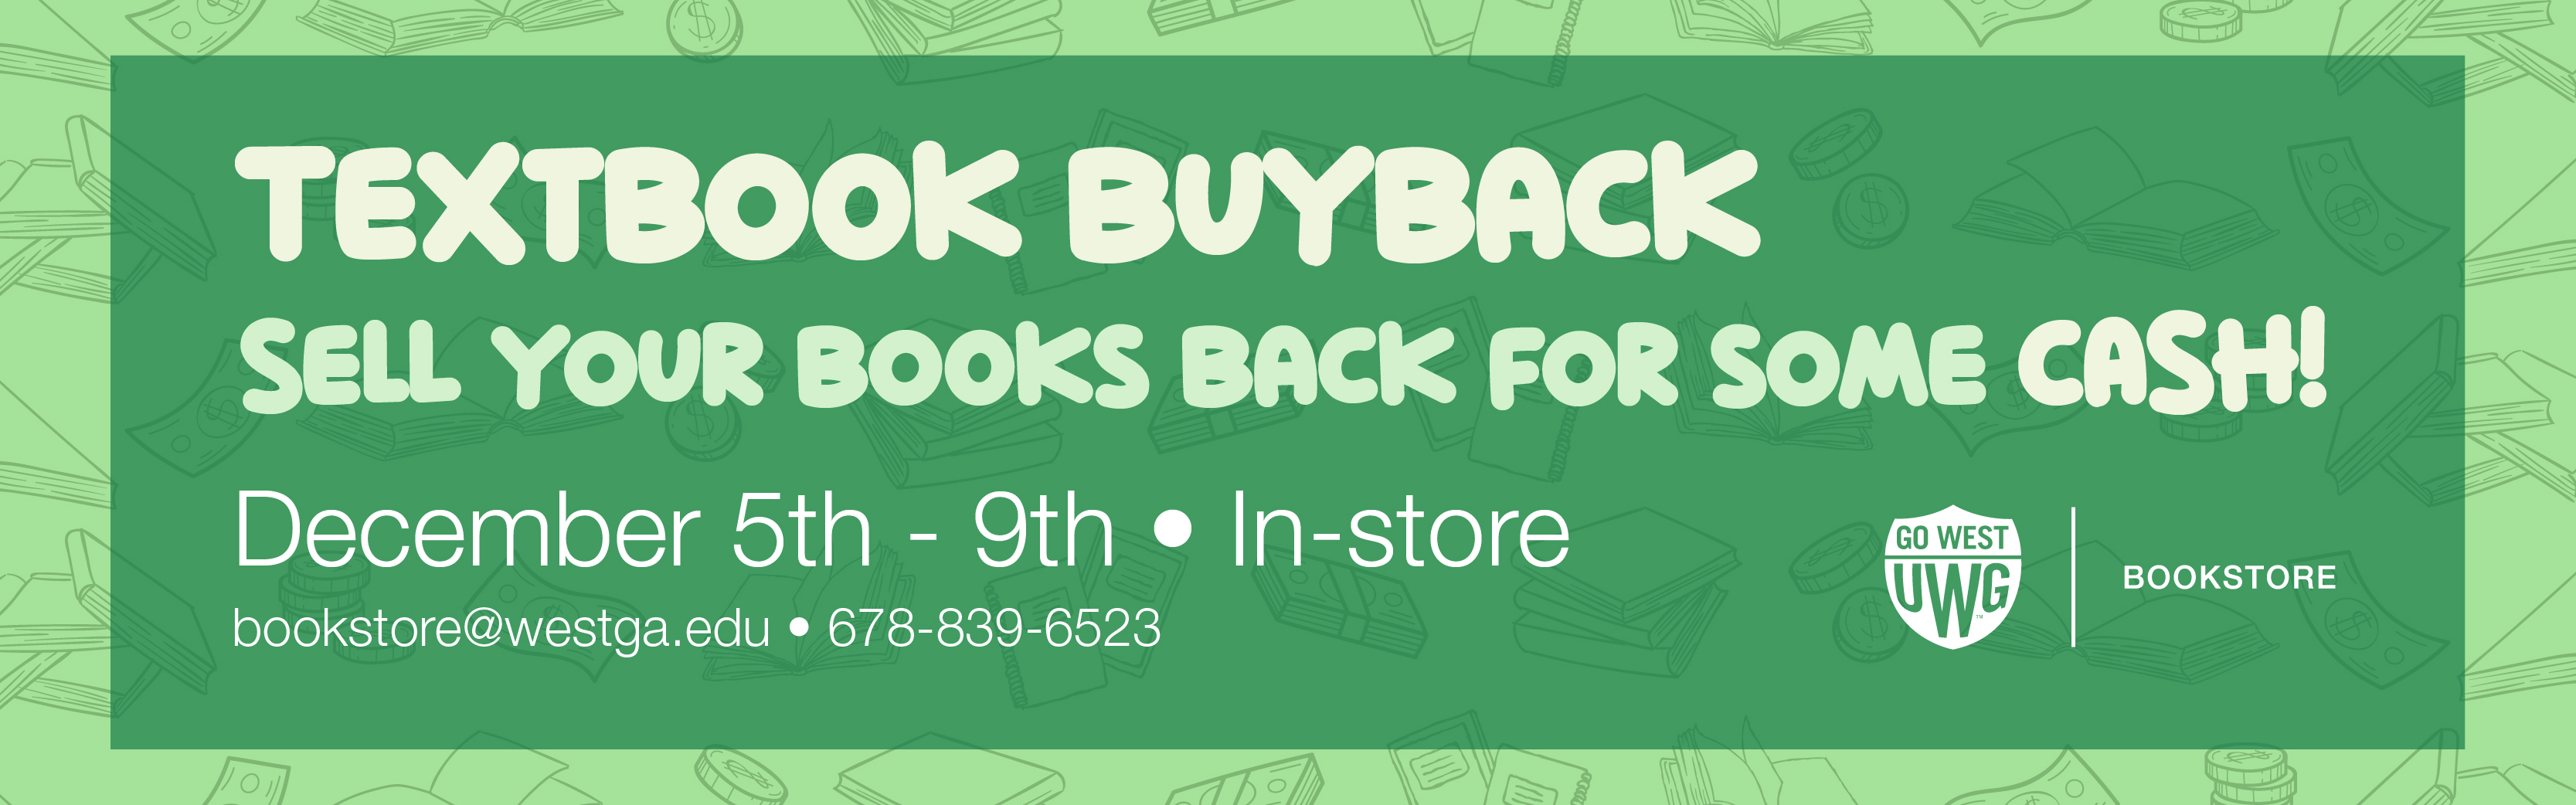 Textbook Buyback: Sell your books back to the bookstore for some cash. December 5th-9th. In-store.